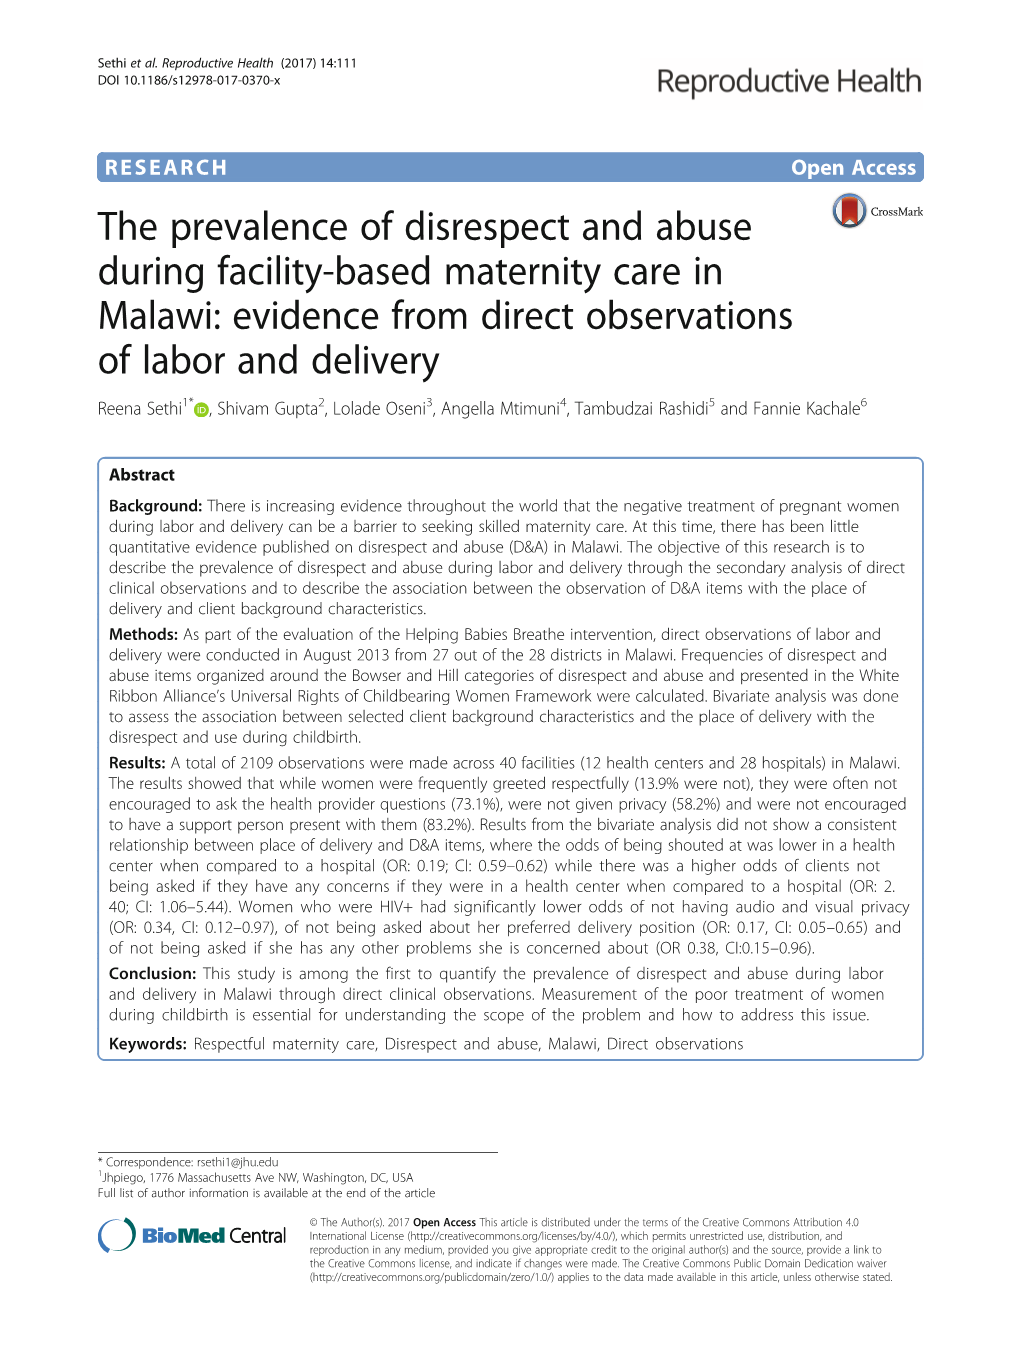 The Prevalence of Disrespect and Abuse During Facility-Based